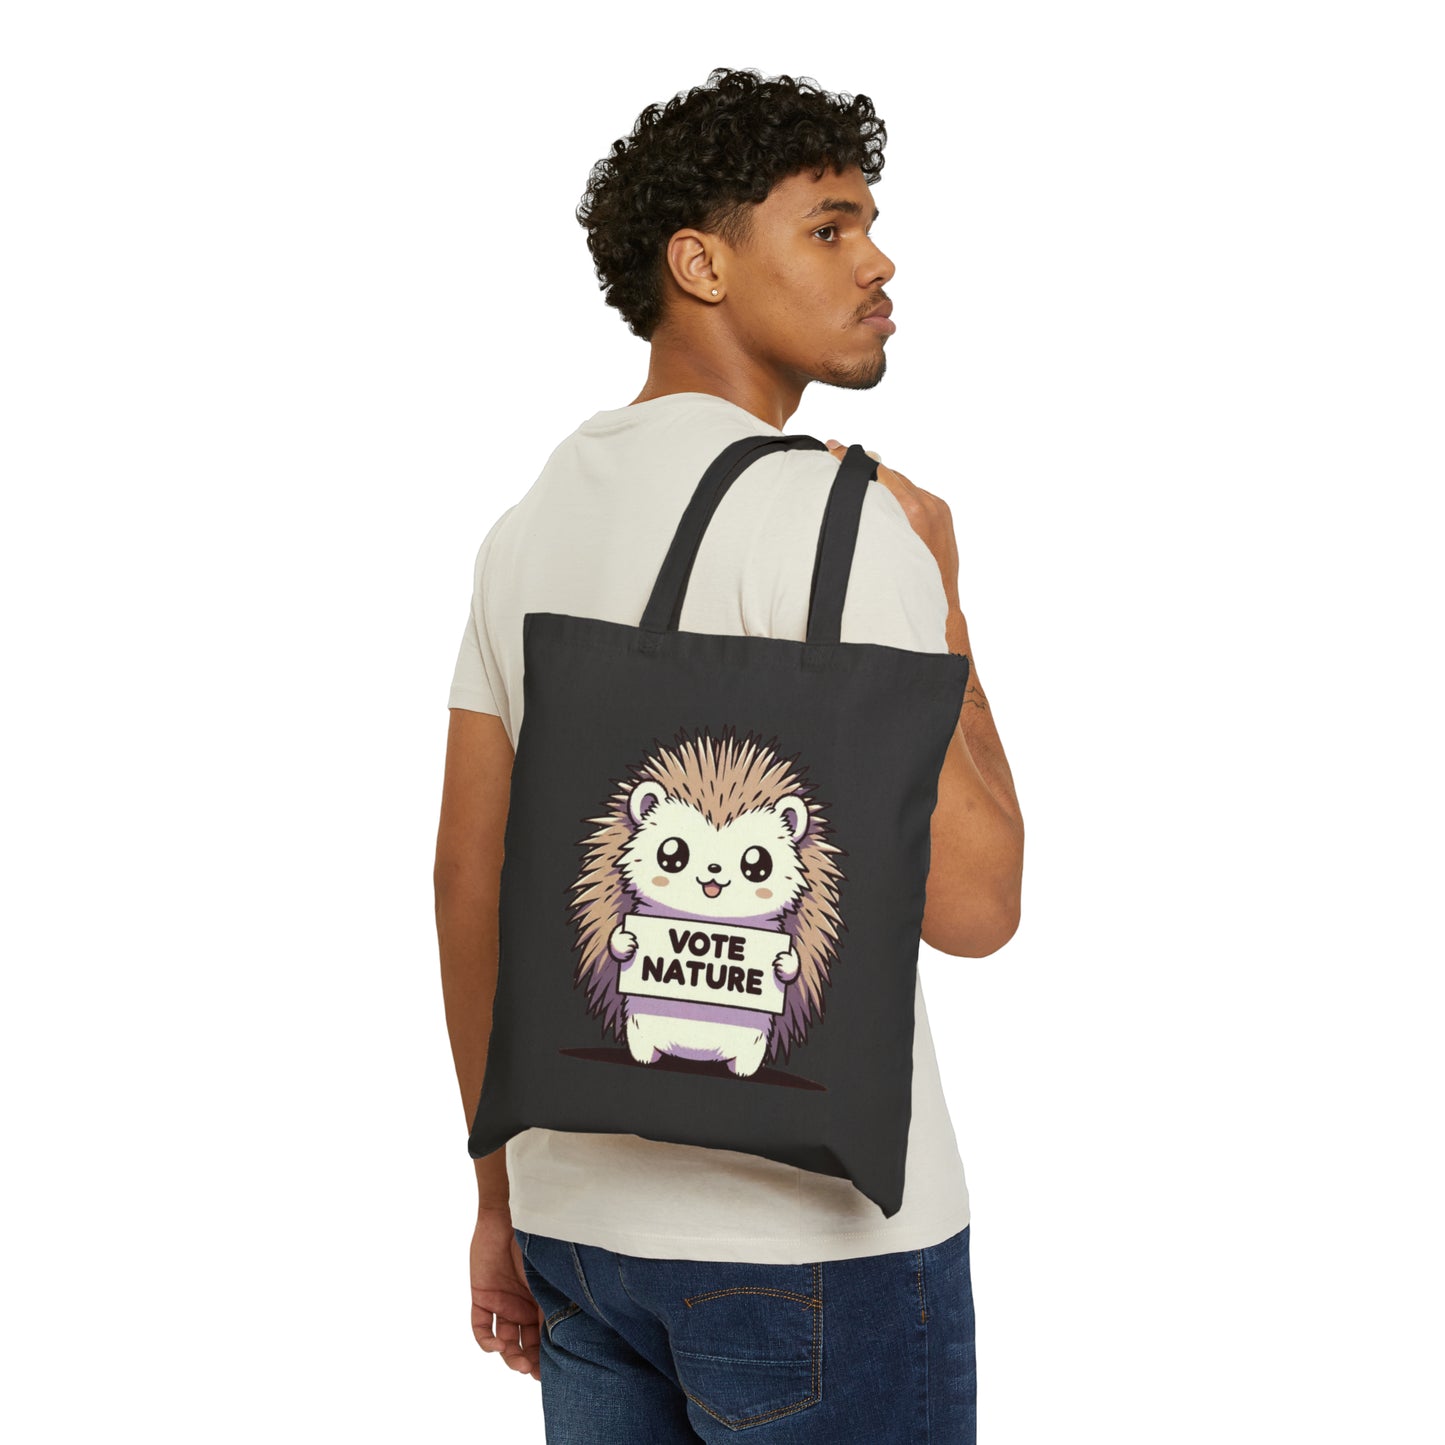 Inspirational Cute Porcupine Statement Cotton Canvas Tote Bag: Vote Nature! & carry a laptop, kindle, phone, notebook, goodies to work/coffee shop